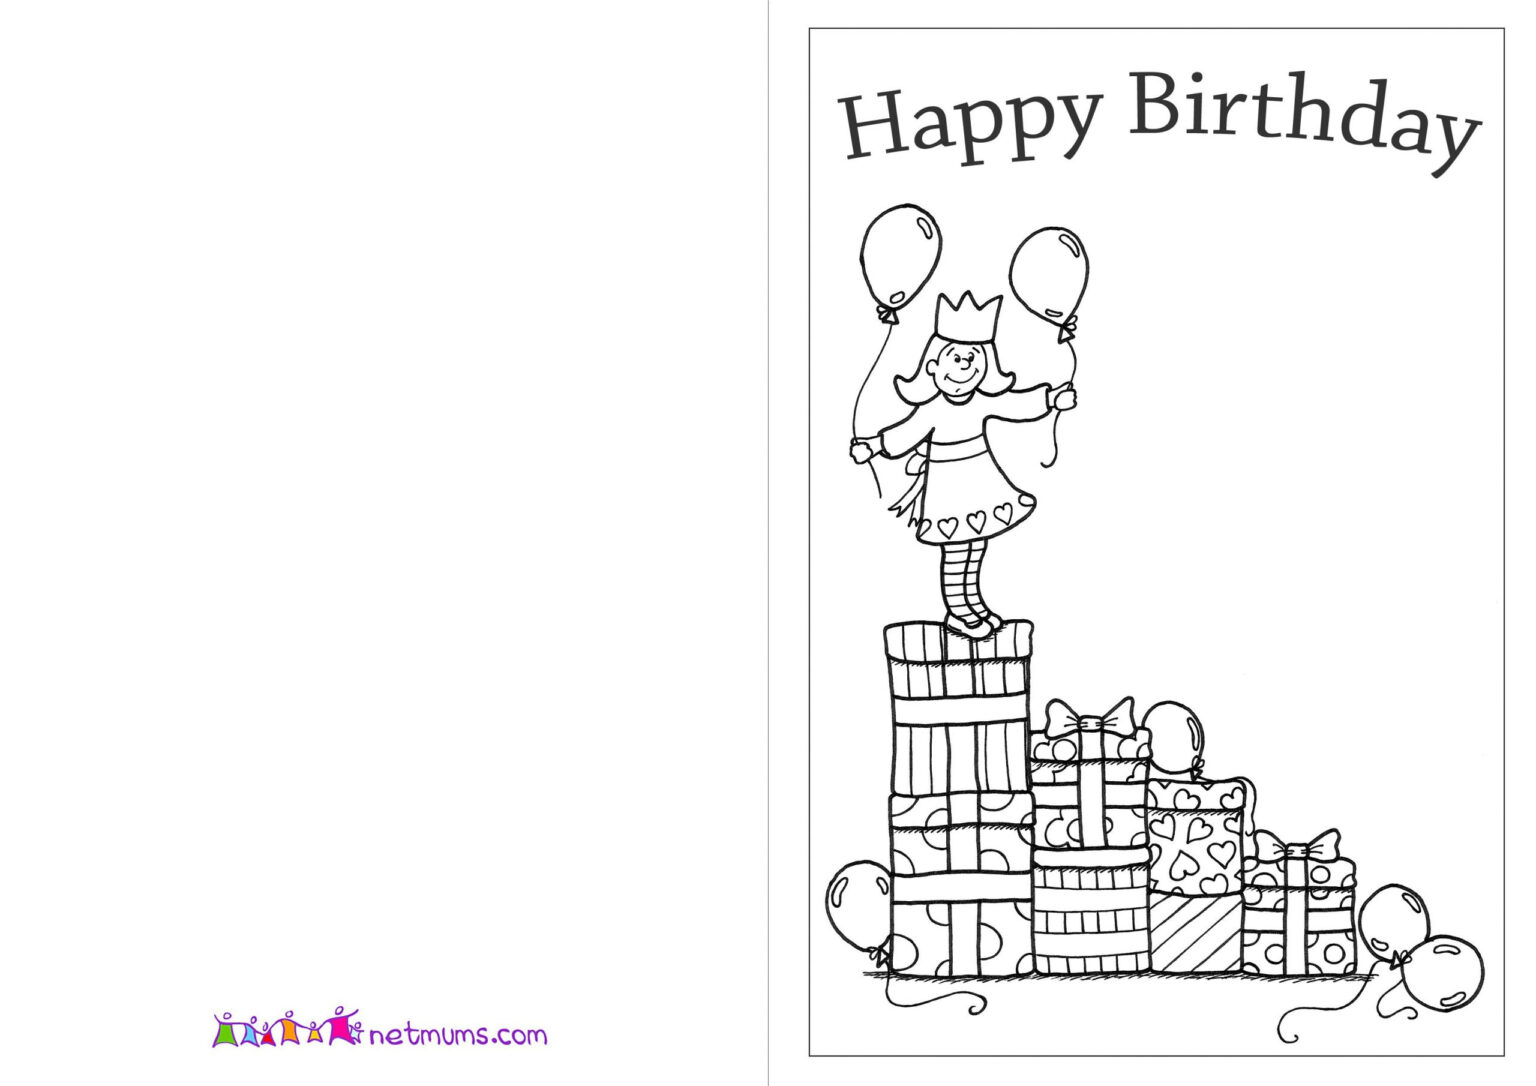 Mothers Birthday Card Template Free